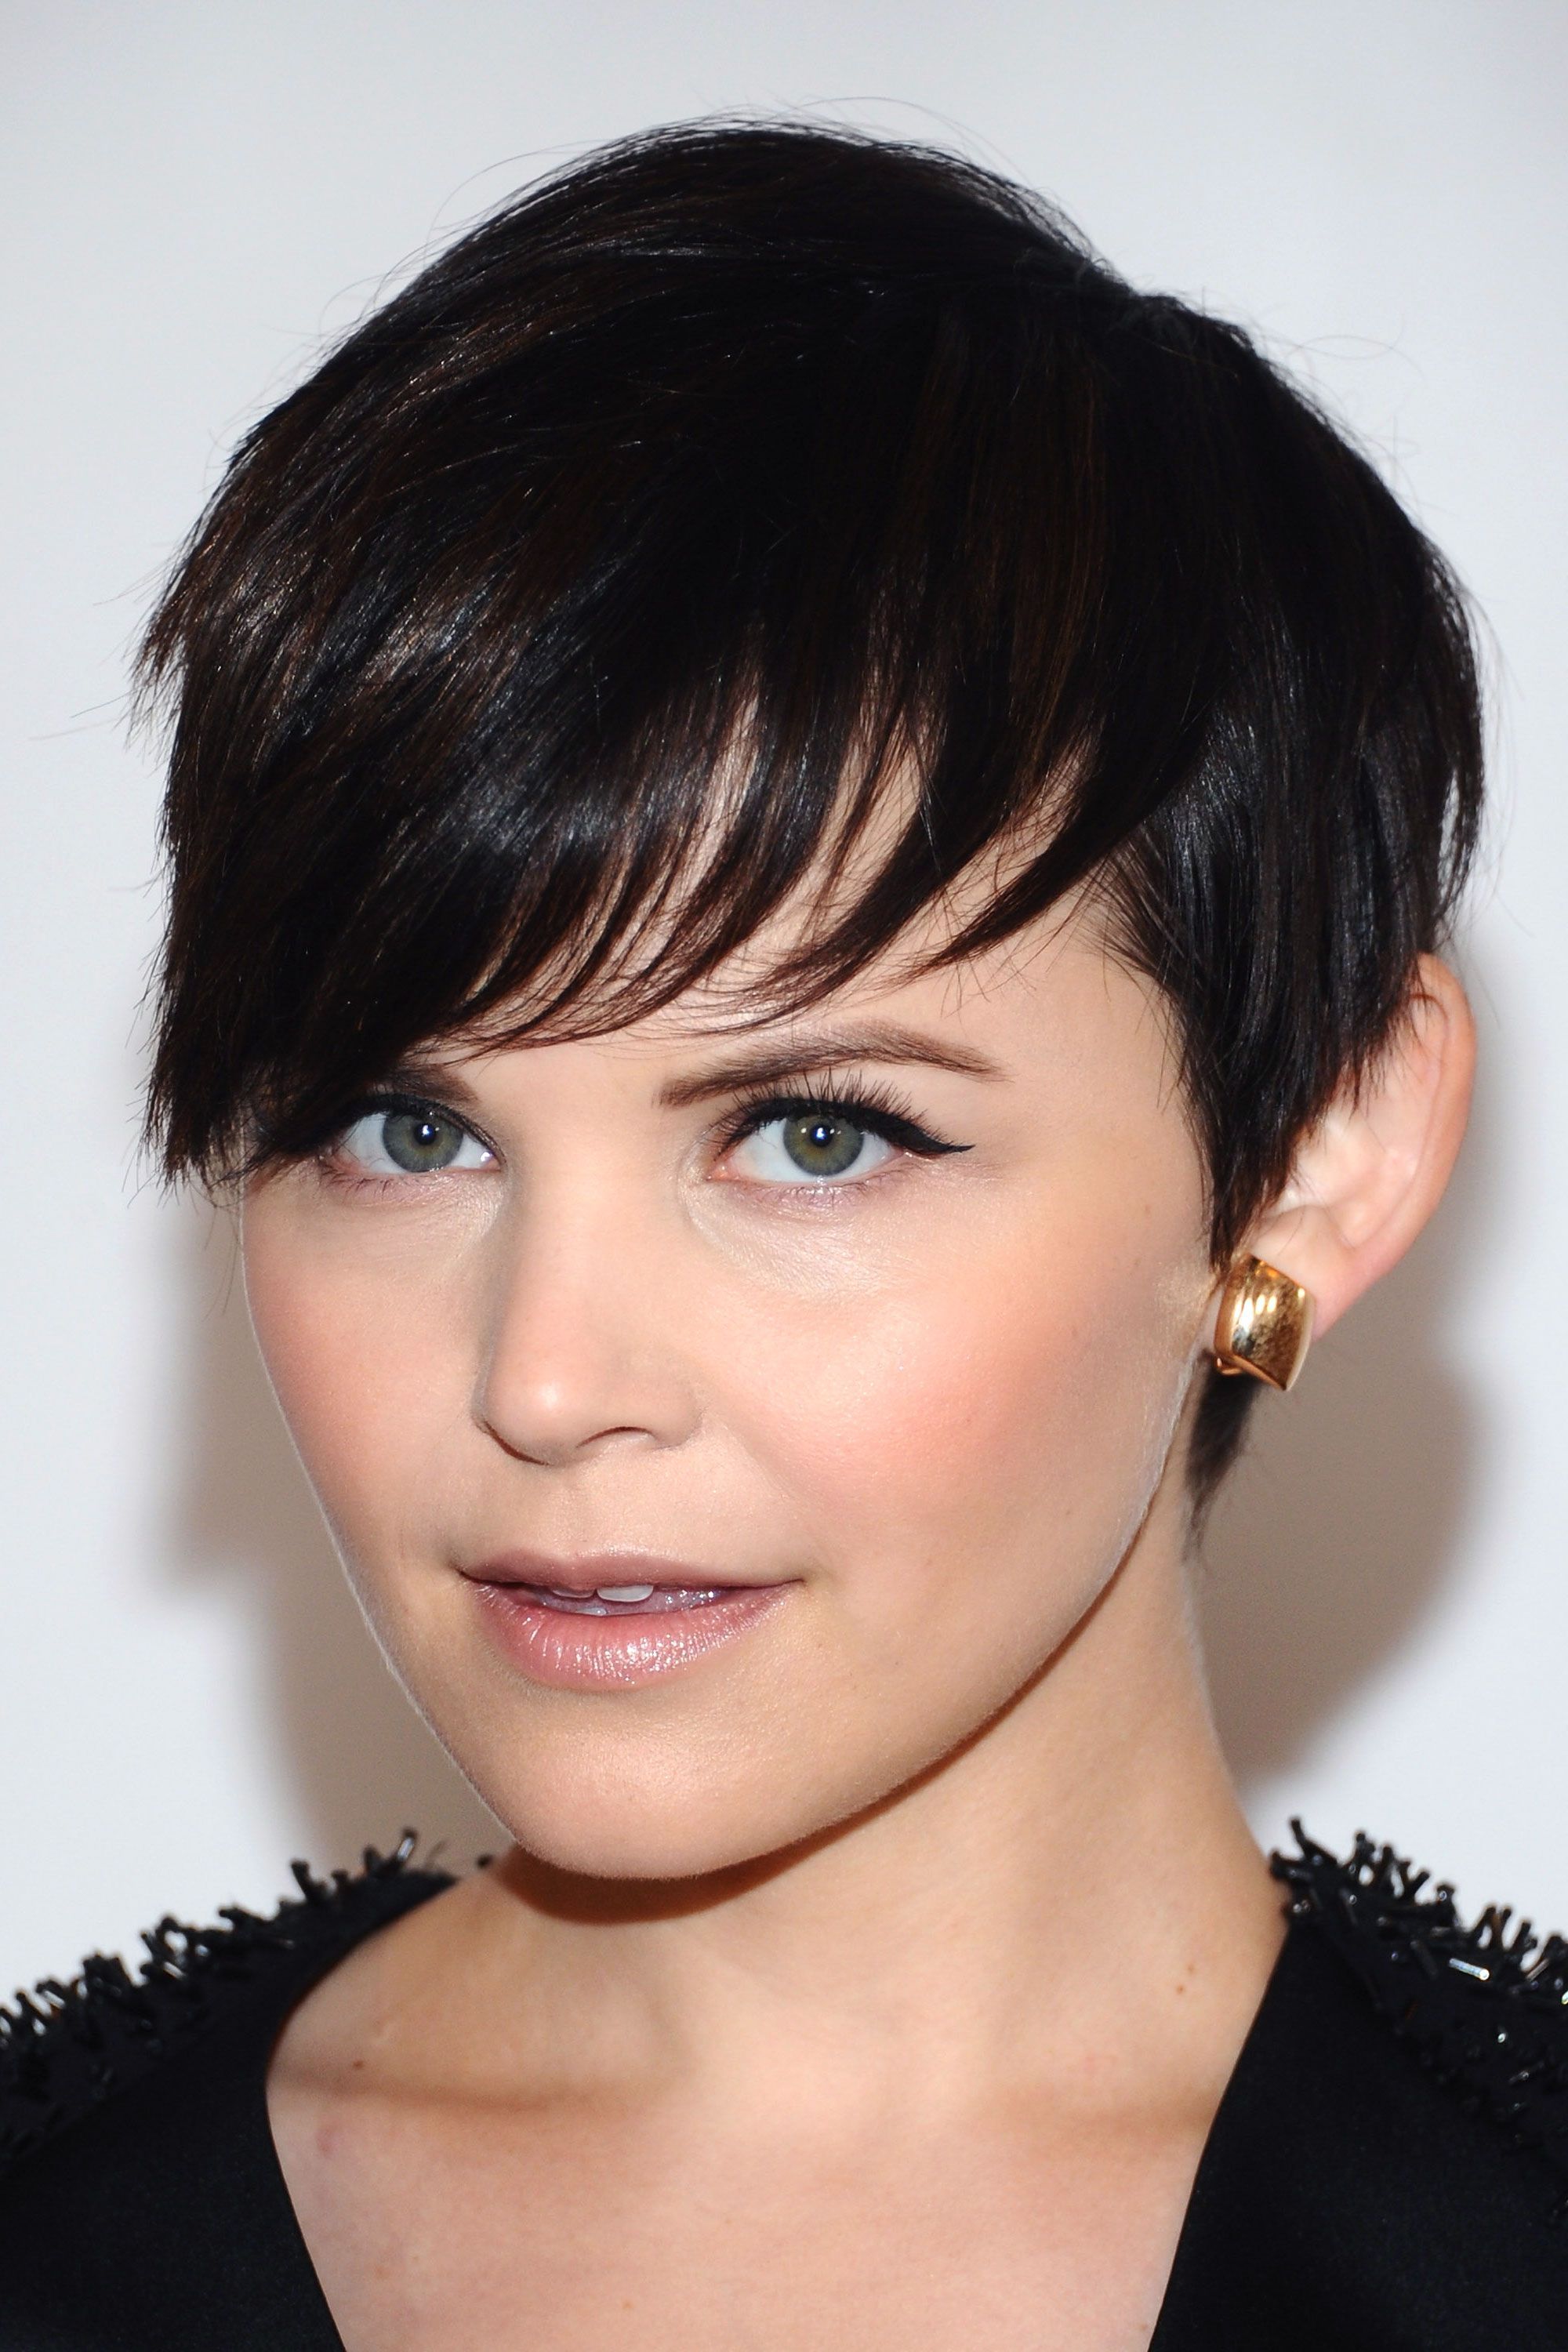 50+ Pixie Cuts We Love For 2018 – Short Pixie Hairstyles From In Layered Pixie Hairstyles With An Edgy Fringe (View 8 of 20)